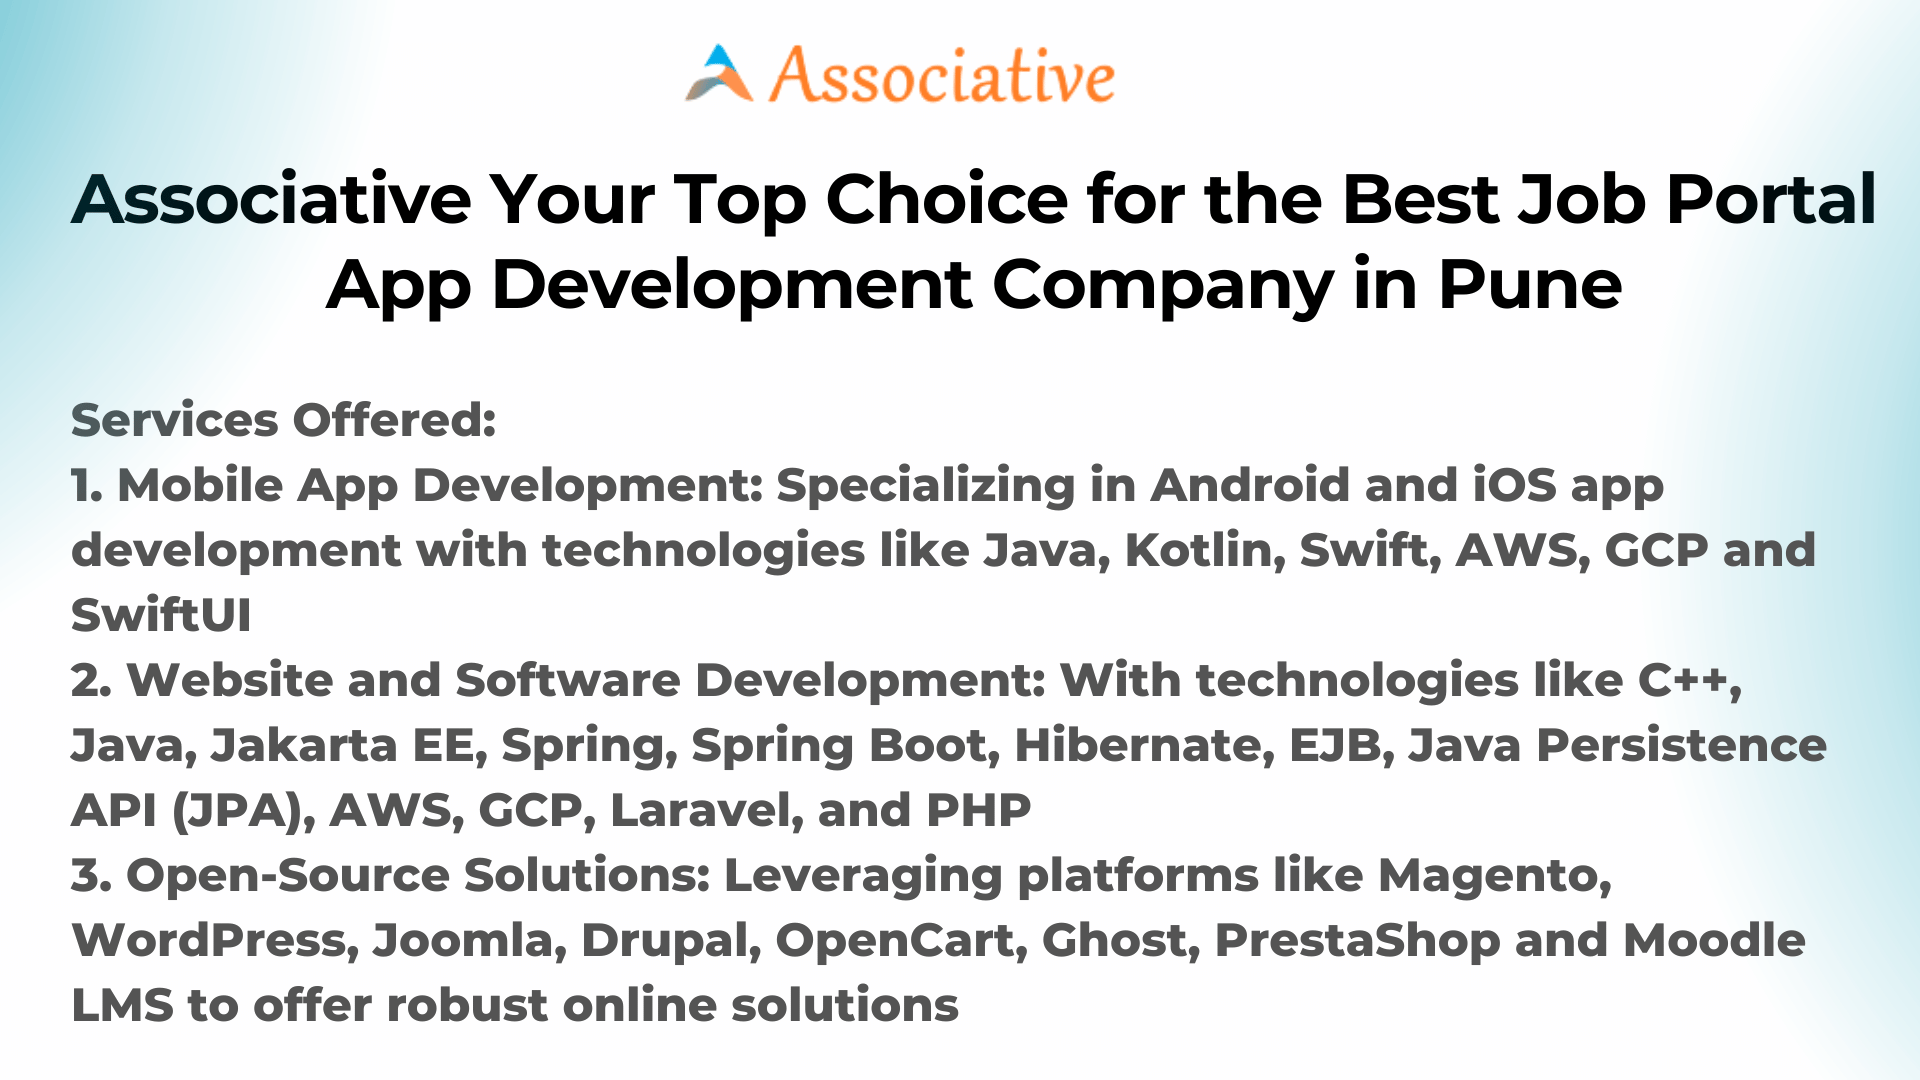 Associative Your Top Choice for the Best Job Portal App Development Company in Pune